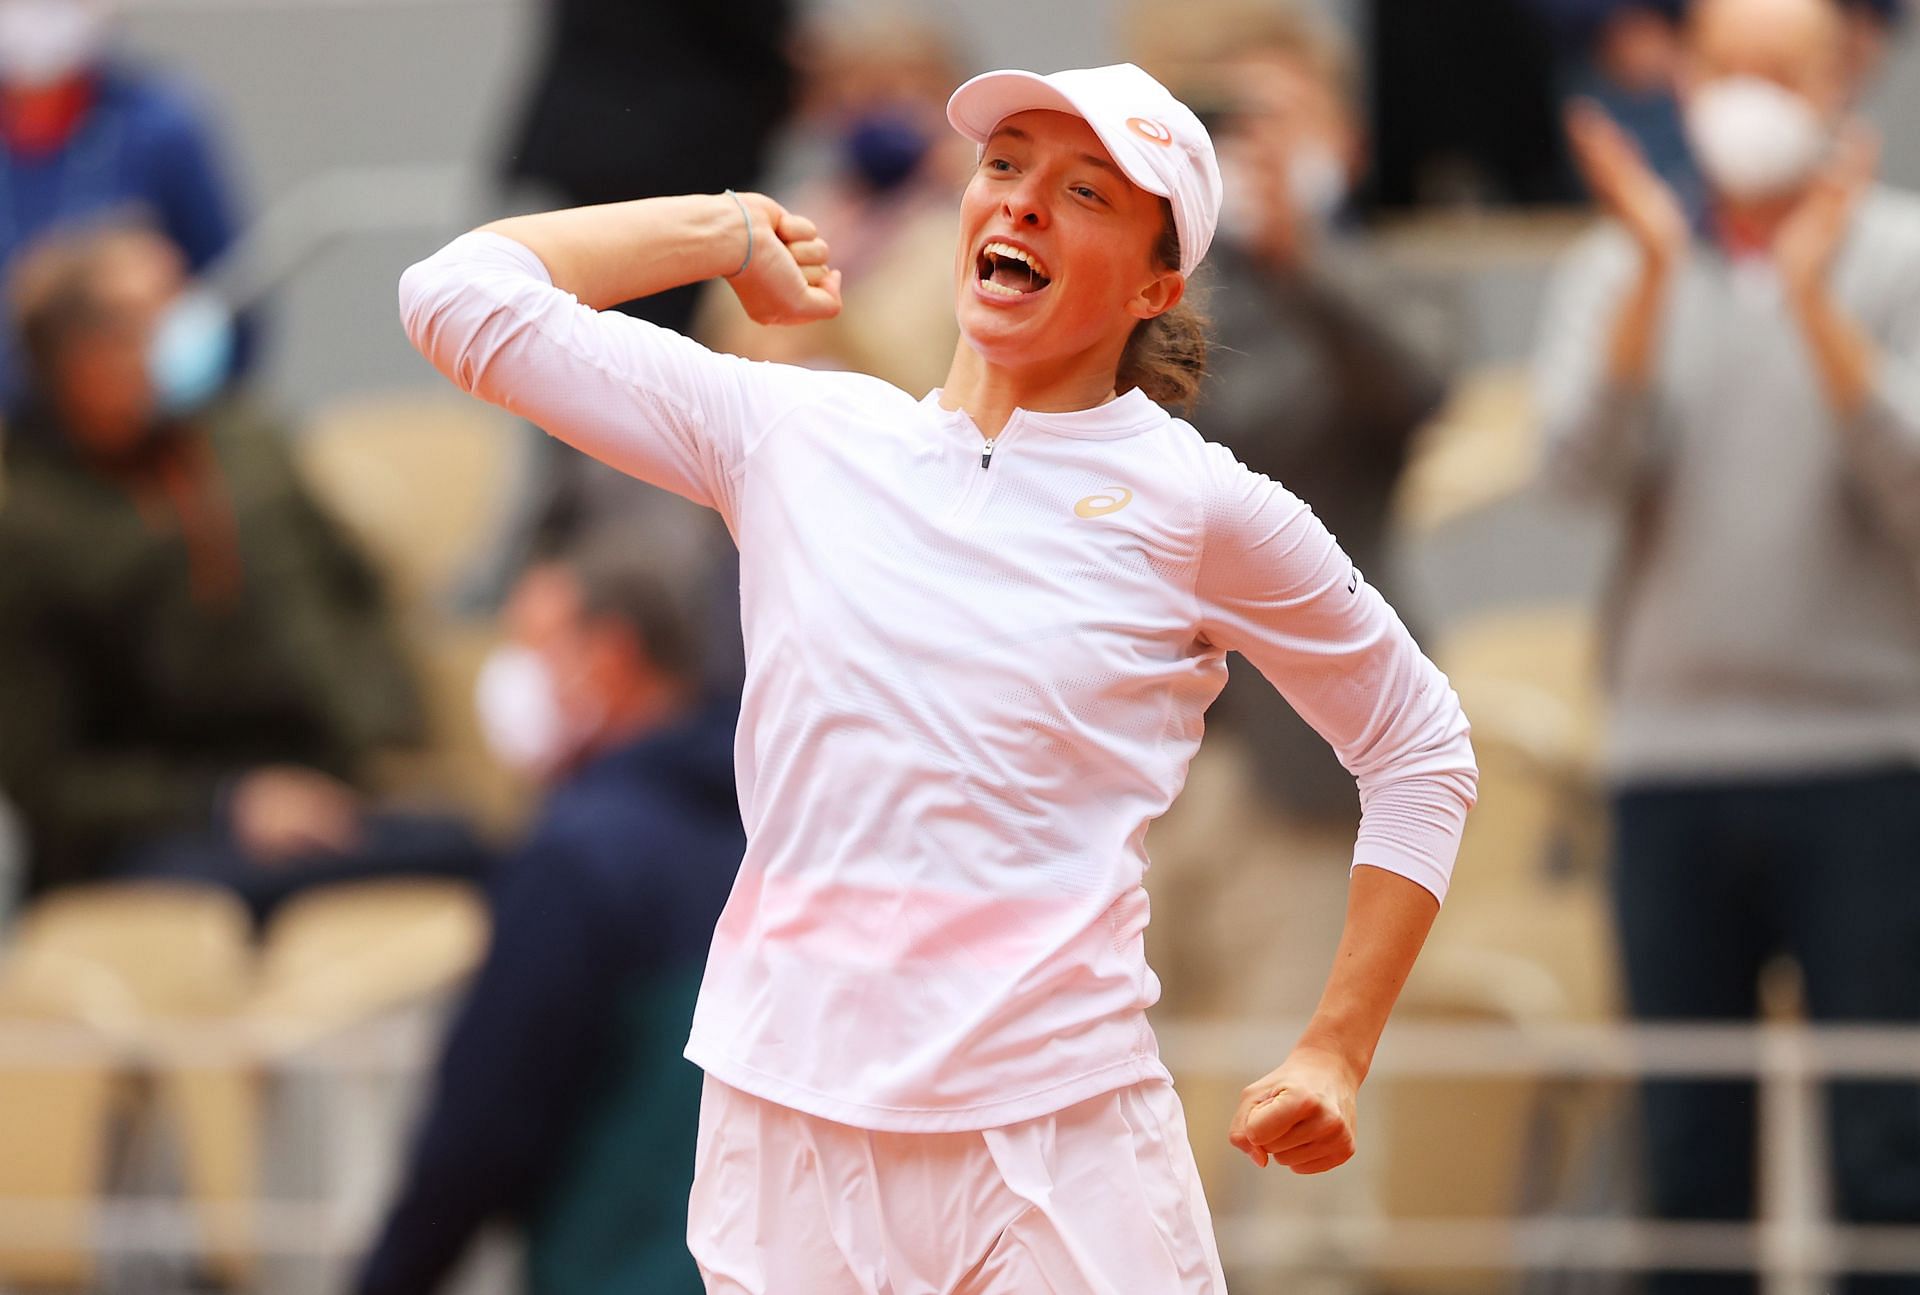 Iga Swiatek at the 2020 French Open.